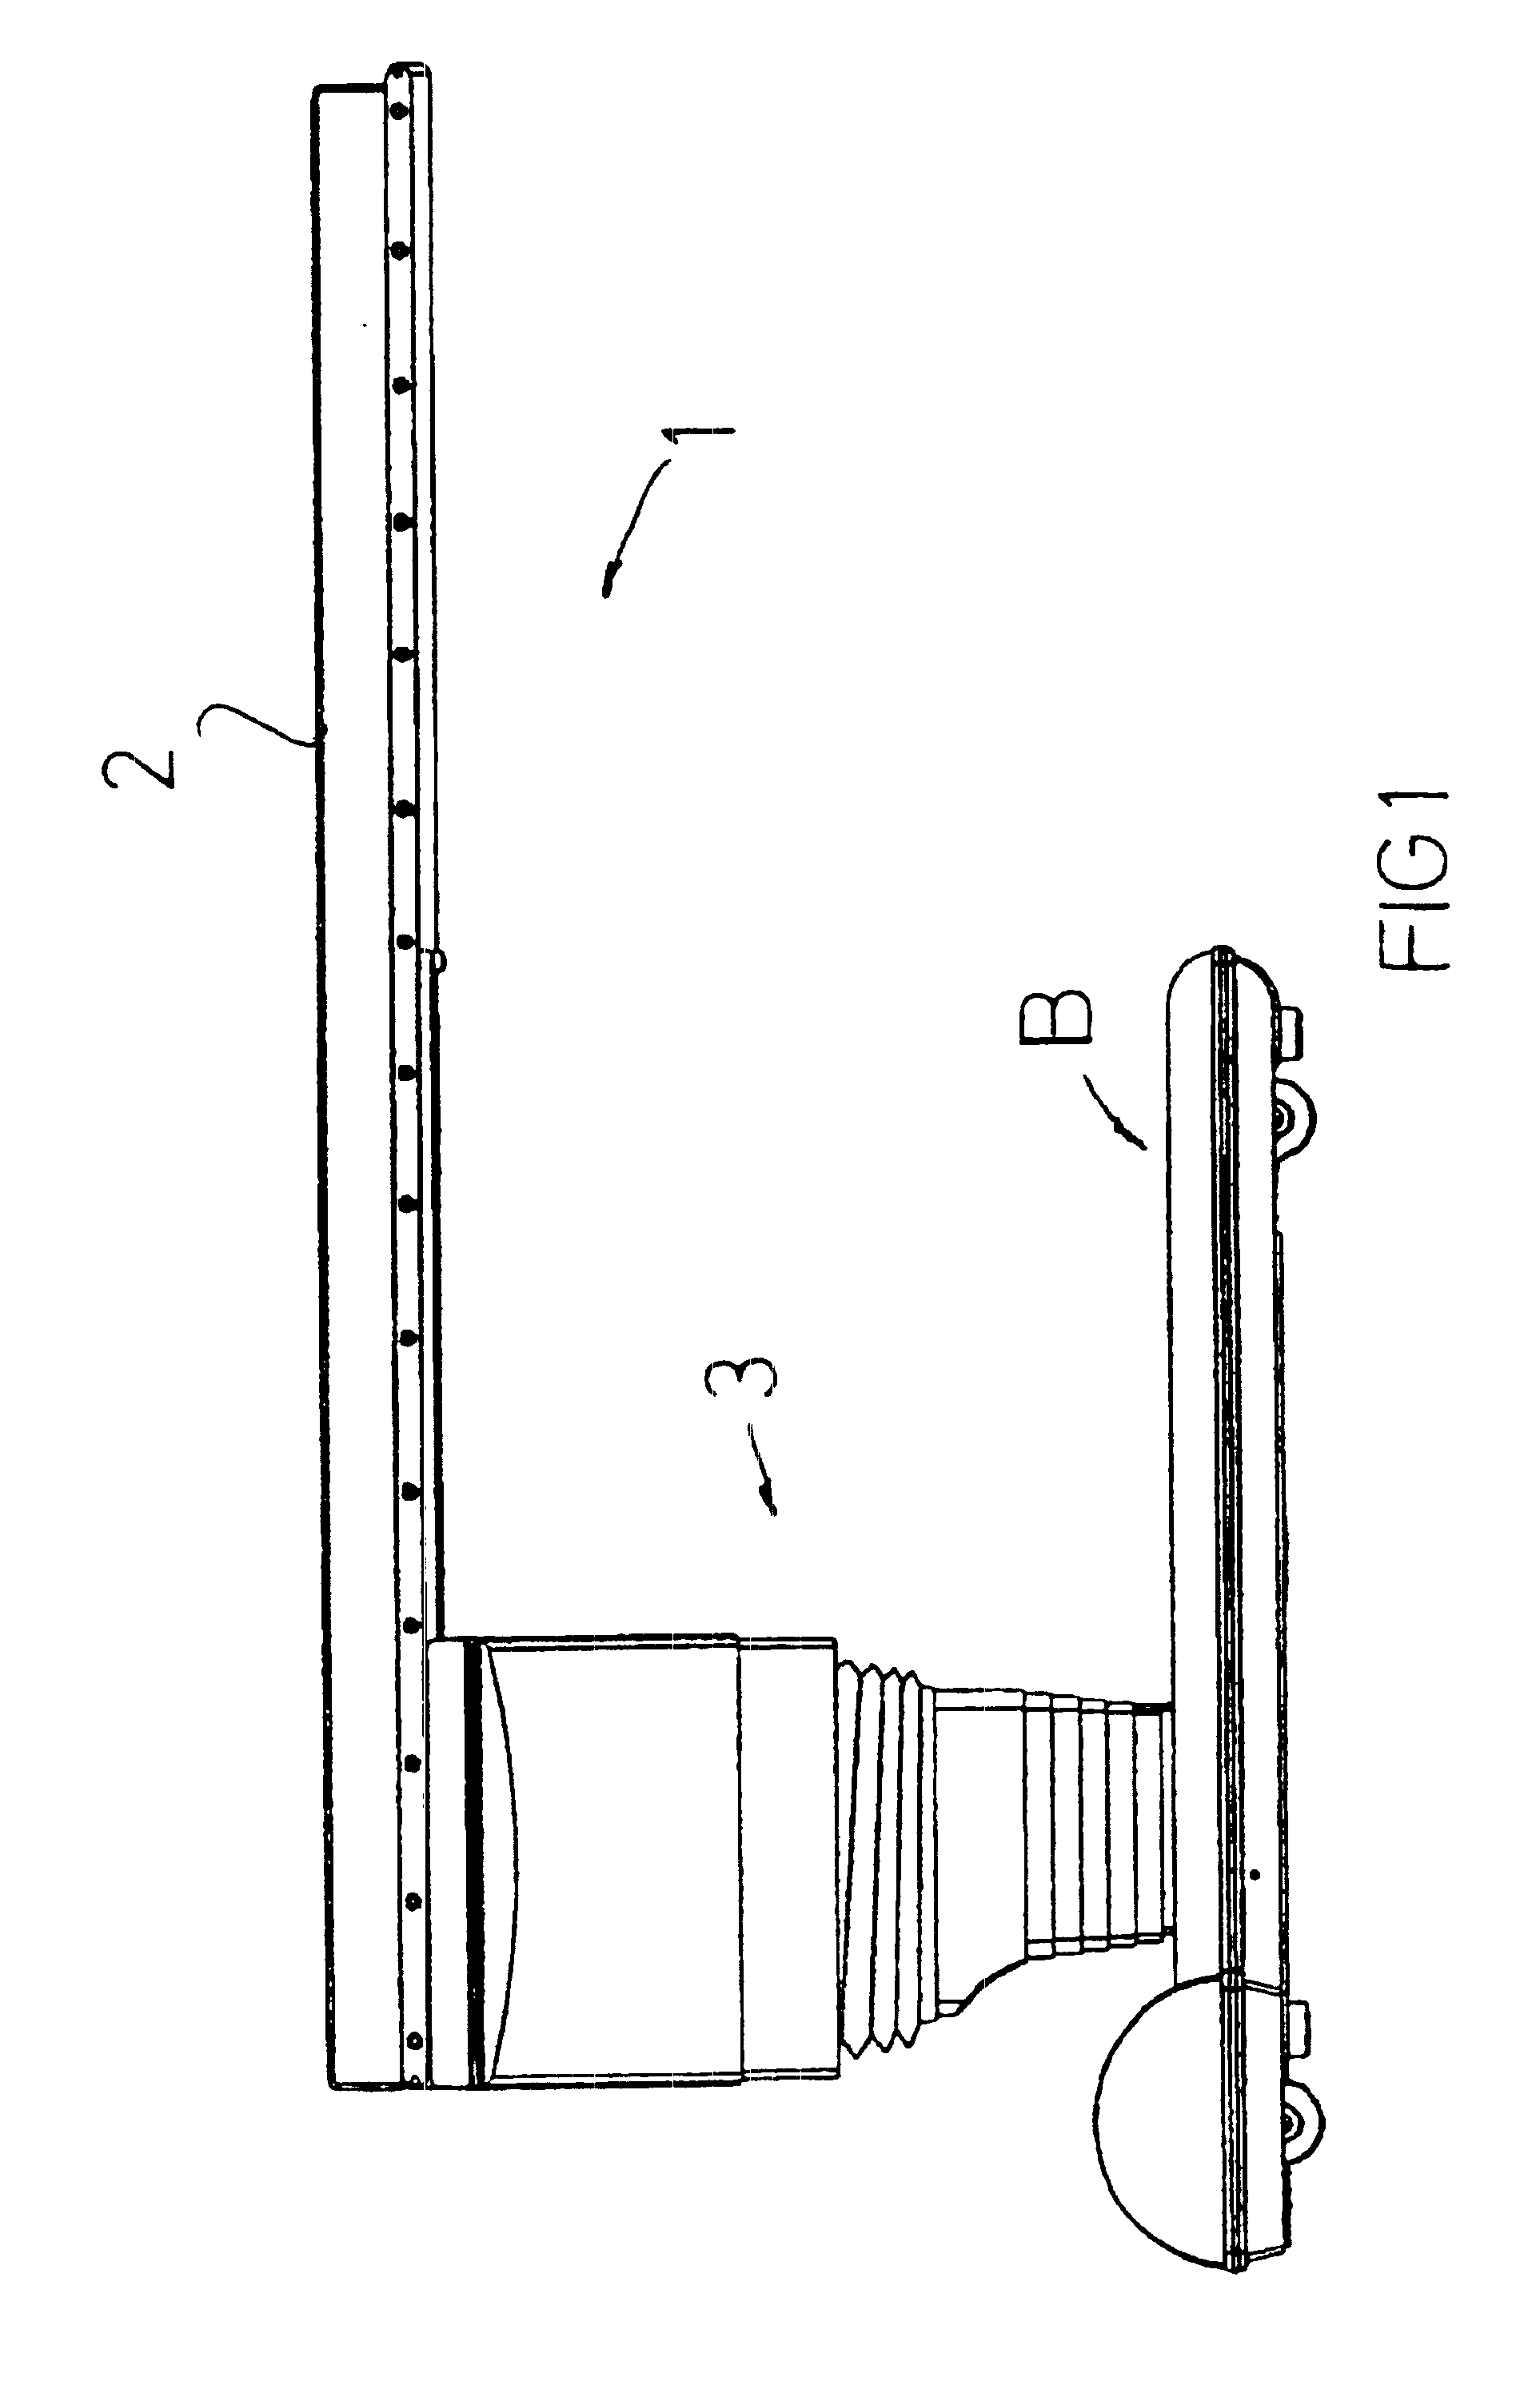 Surgical table with displacement arrangement